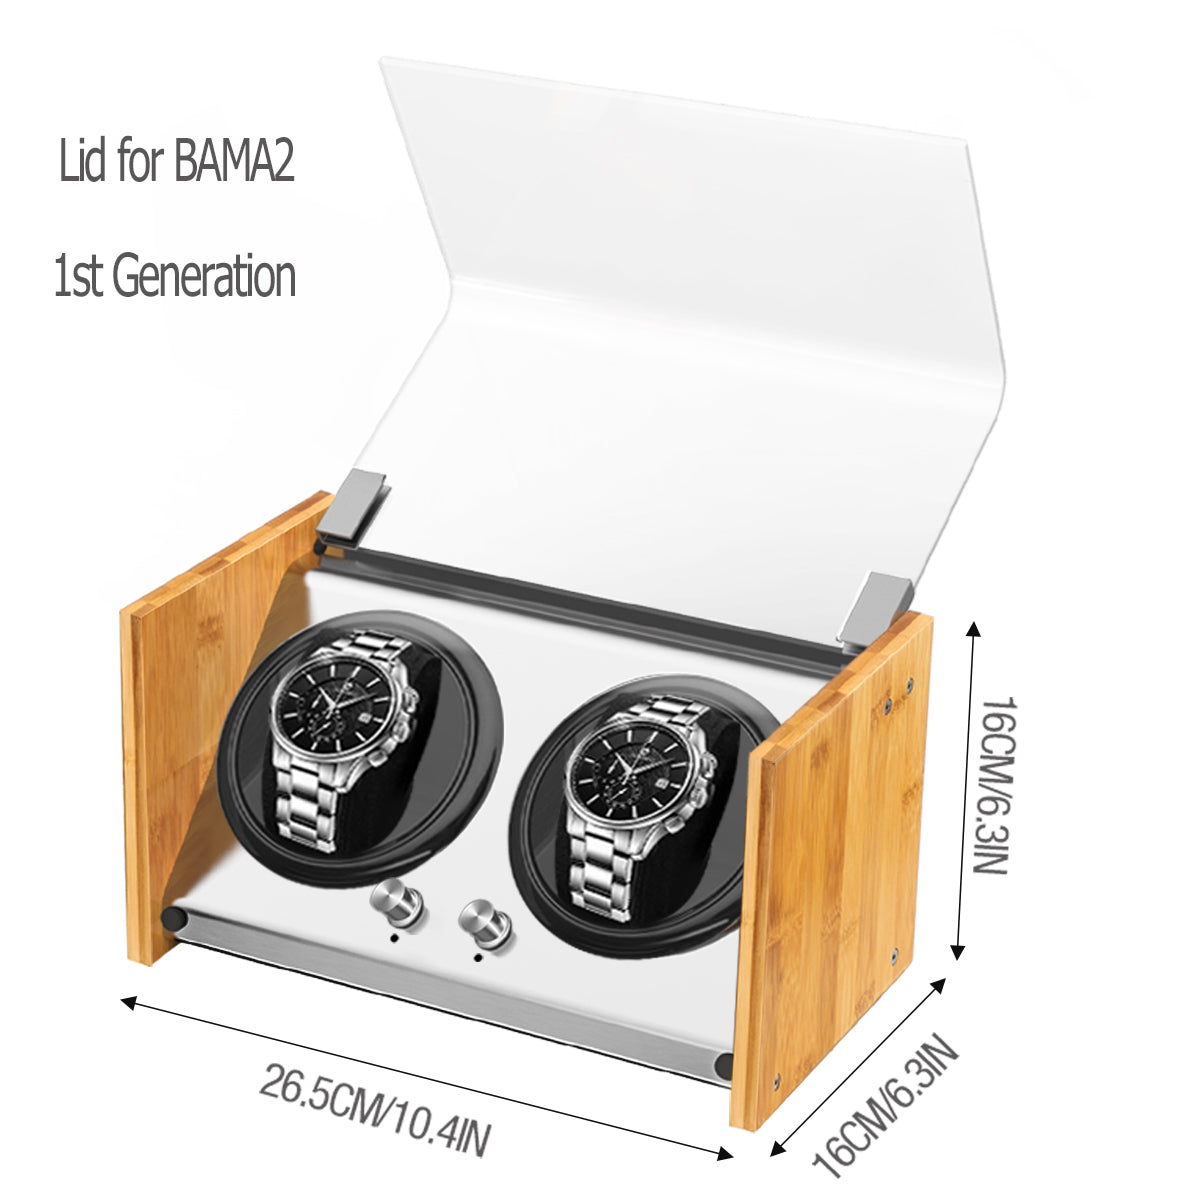 Acrylic Lid Only for Watch Winder Model BAMA2 1st Generation